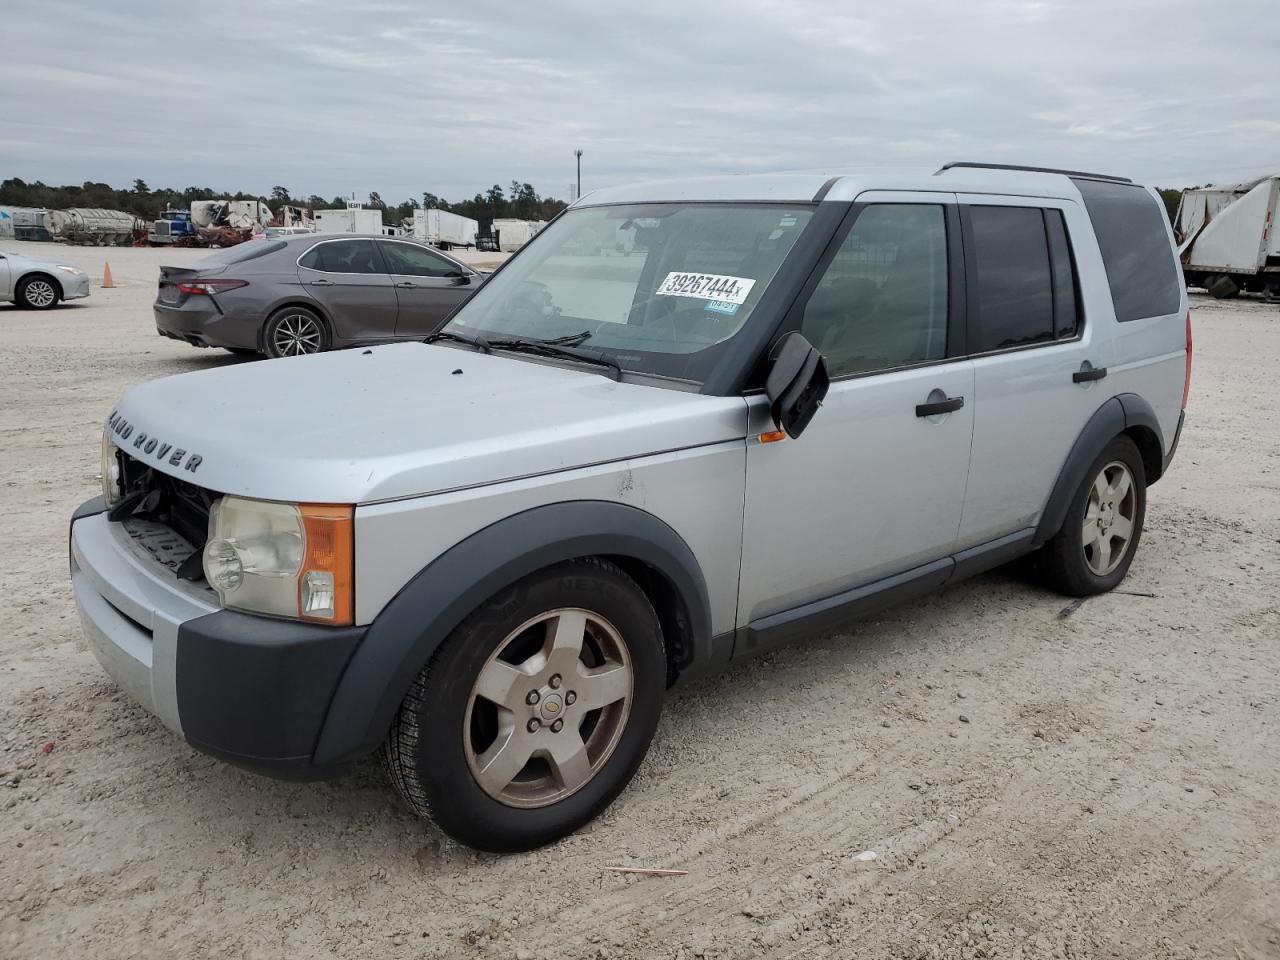 vin: SALAD24446A392705 SALAD24446A392705 2006 land rover lr3 4000 for Sale in 77073 4903, Tx - Houston, Houston, USA